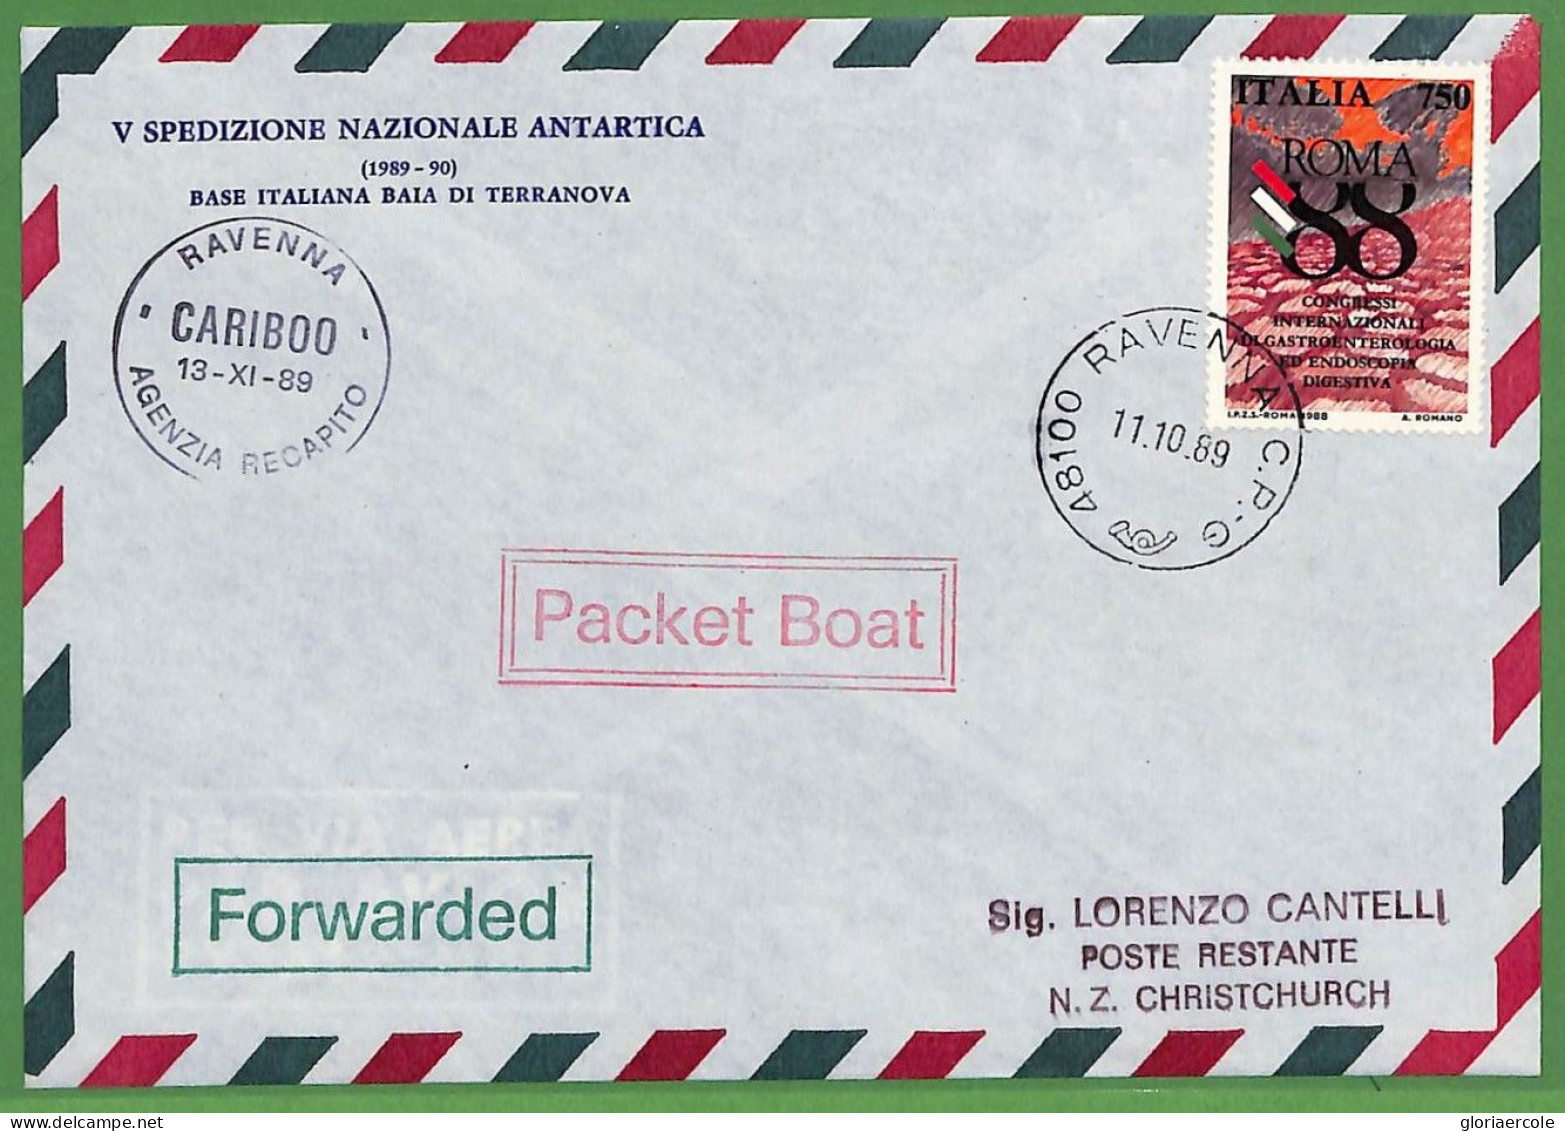 Ae3433 -  ITALY - Postal History - ANTARCTIC Expedition - FOWARDING AGENT 1989 - Expéditions Antarctiques